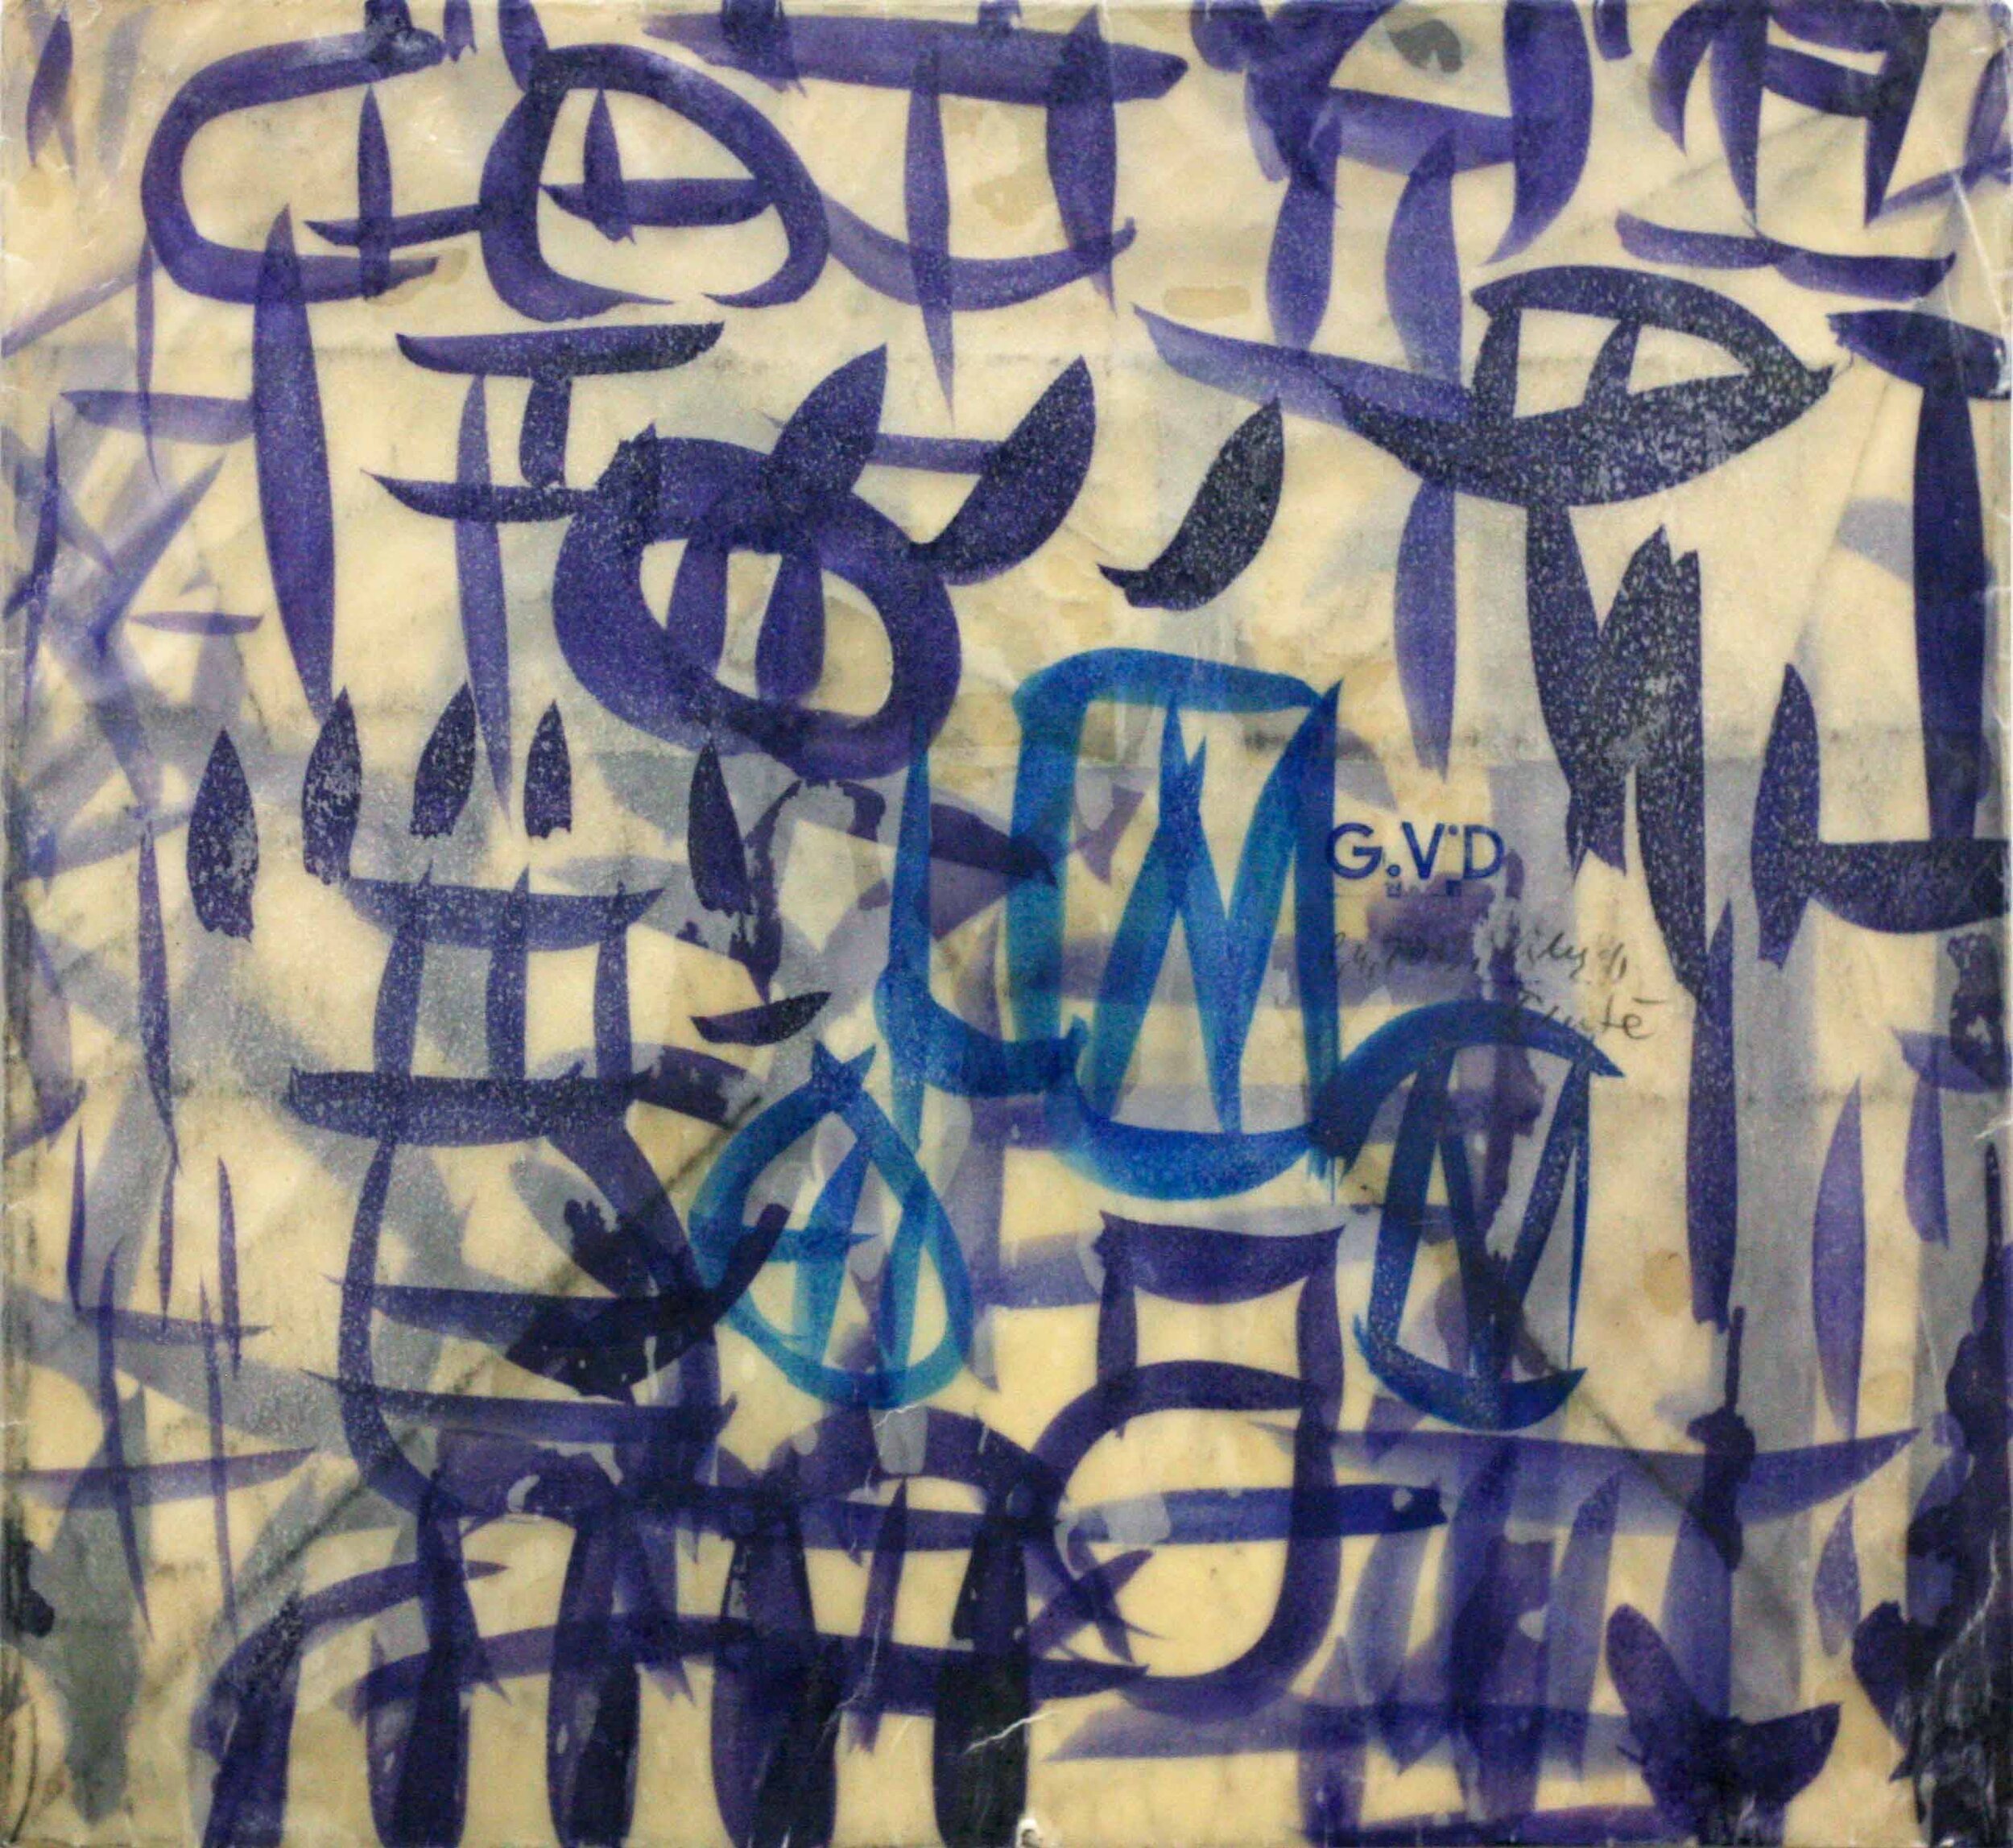  “Envelope from Šilutė (1)”, 27 × 30 cm, Aquarell and Wax on Paper, 2013 